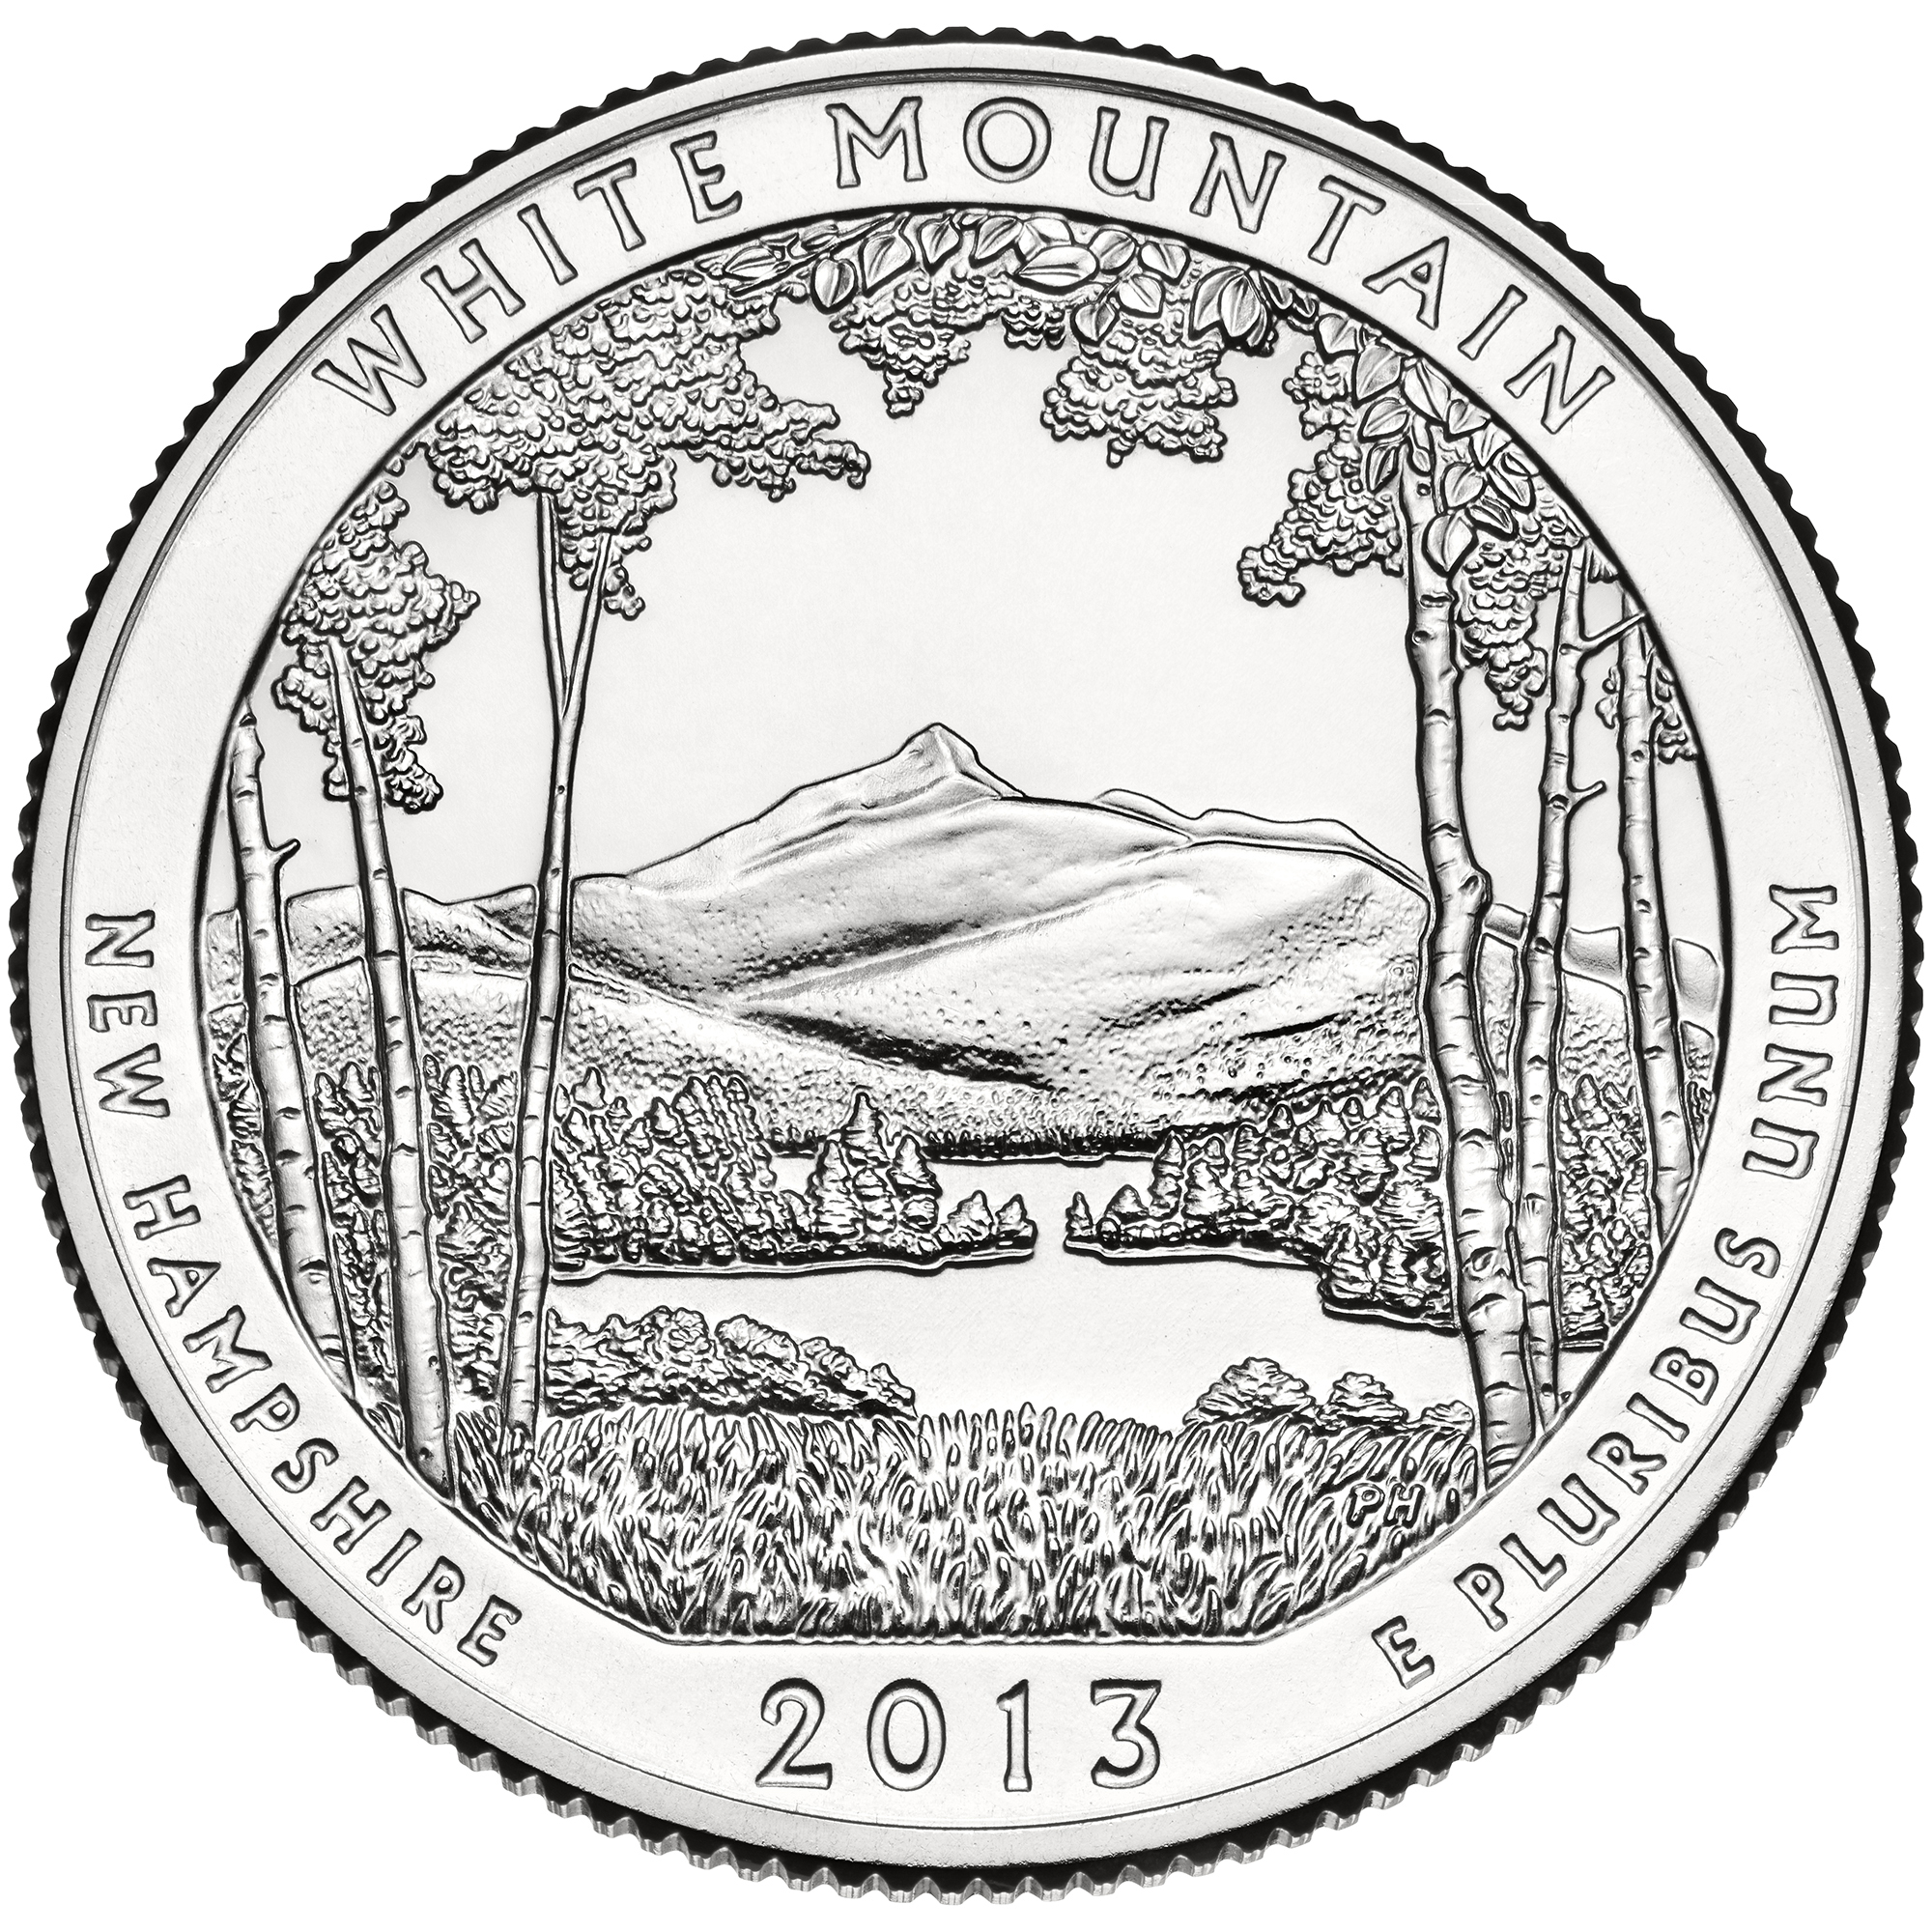 Details about   America the Beautiful Quarter  Cut from New Hampshire Featuring White Mountain 